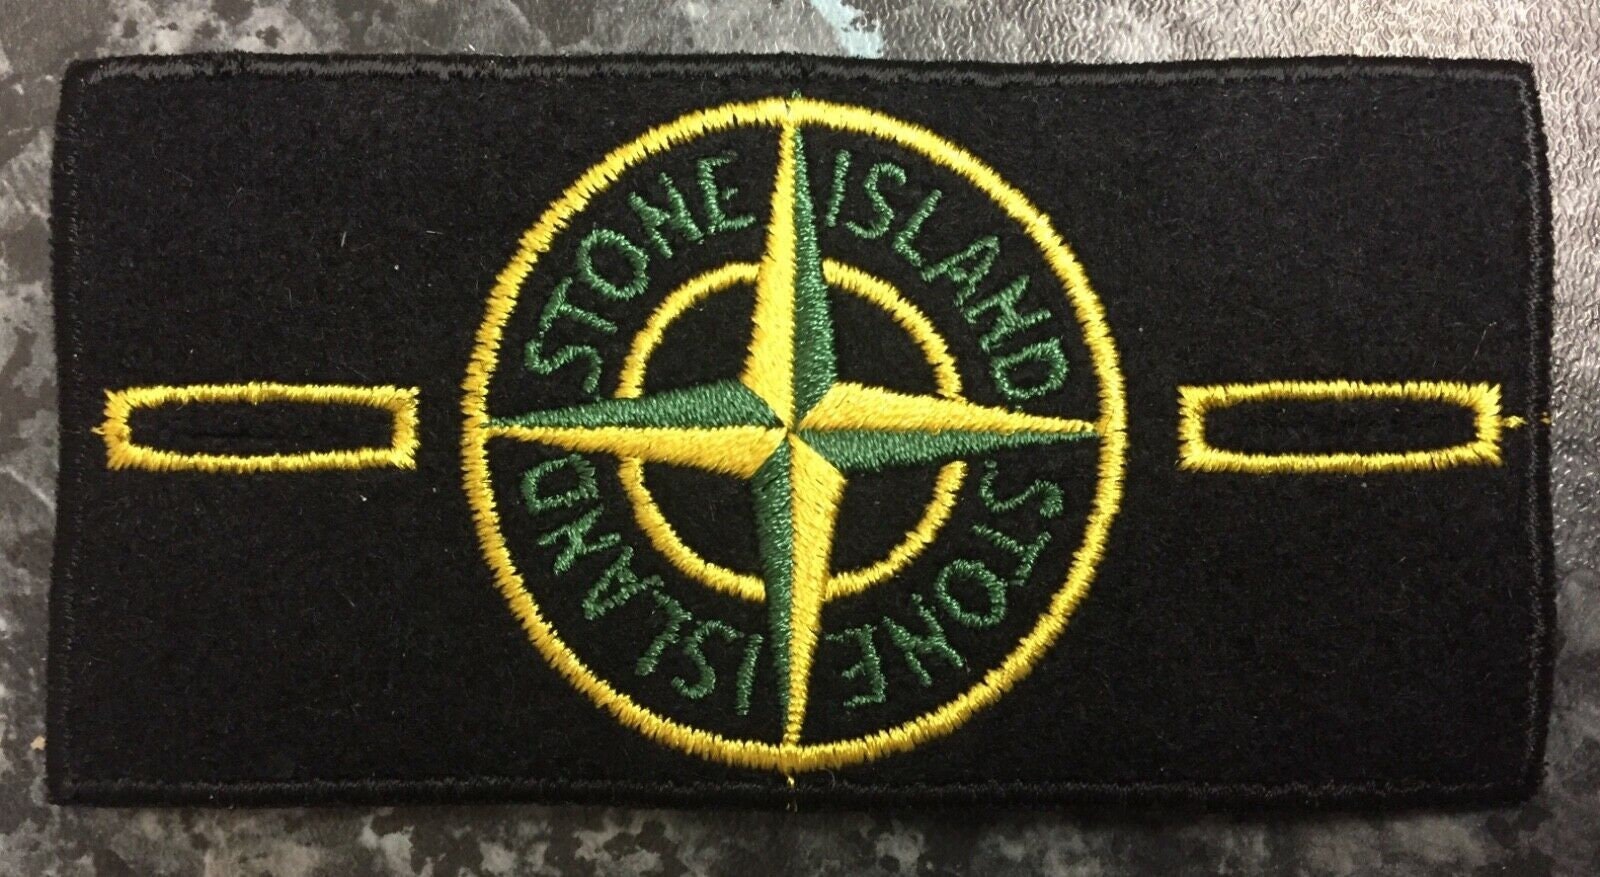 Stone Island Badge Authentic Replacement 2 Buttons FREE - Etsy UK